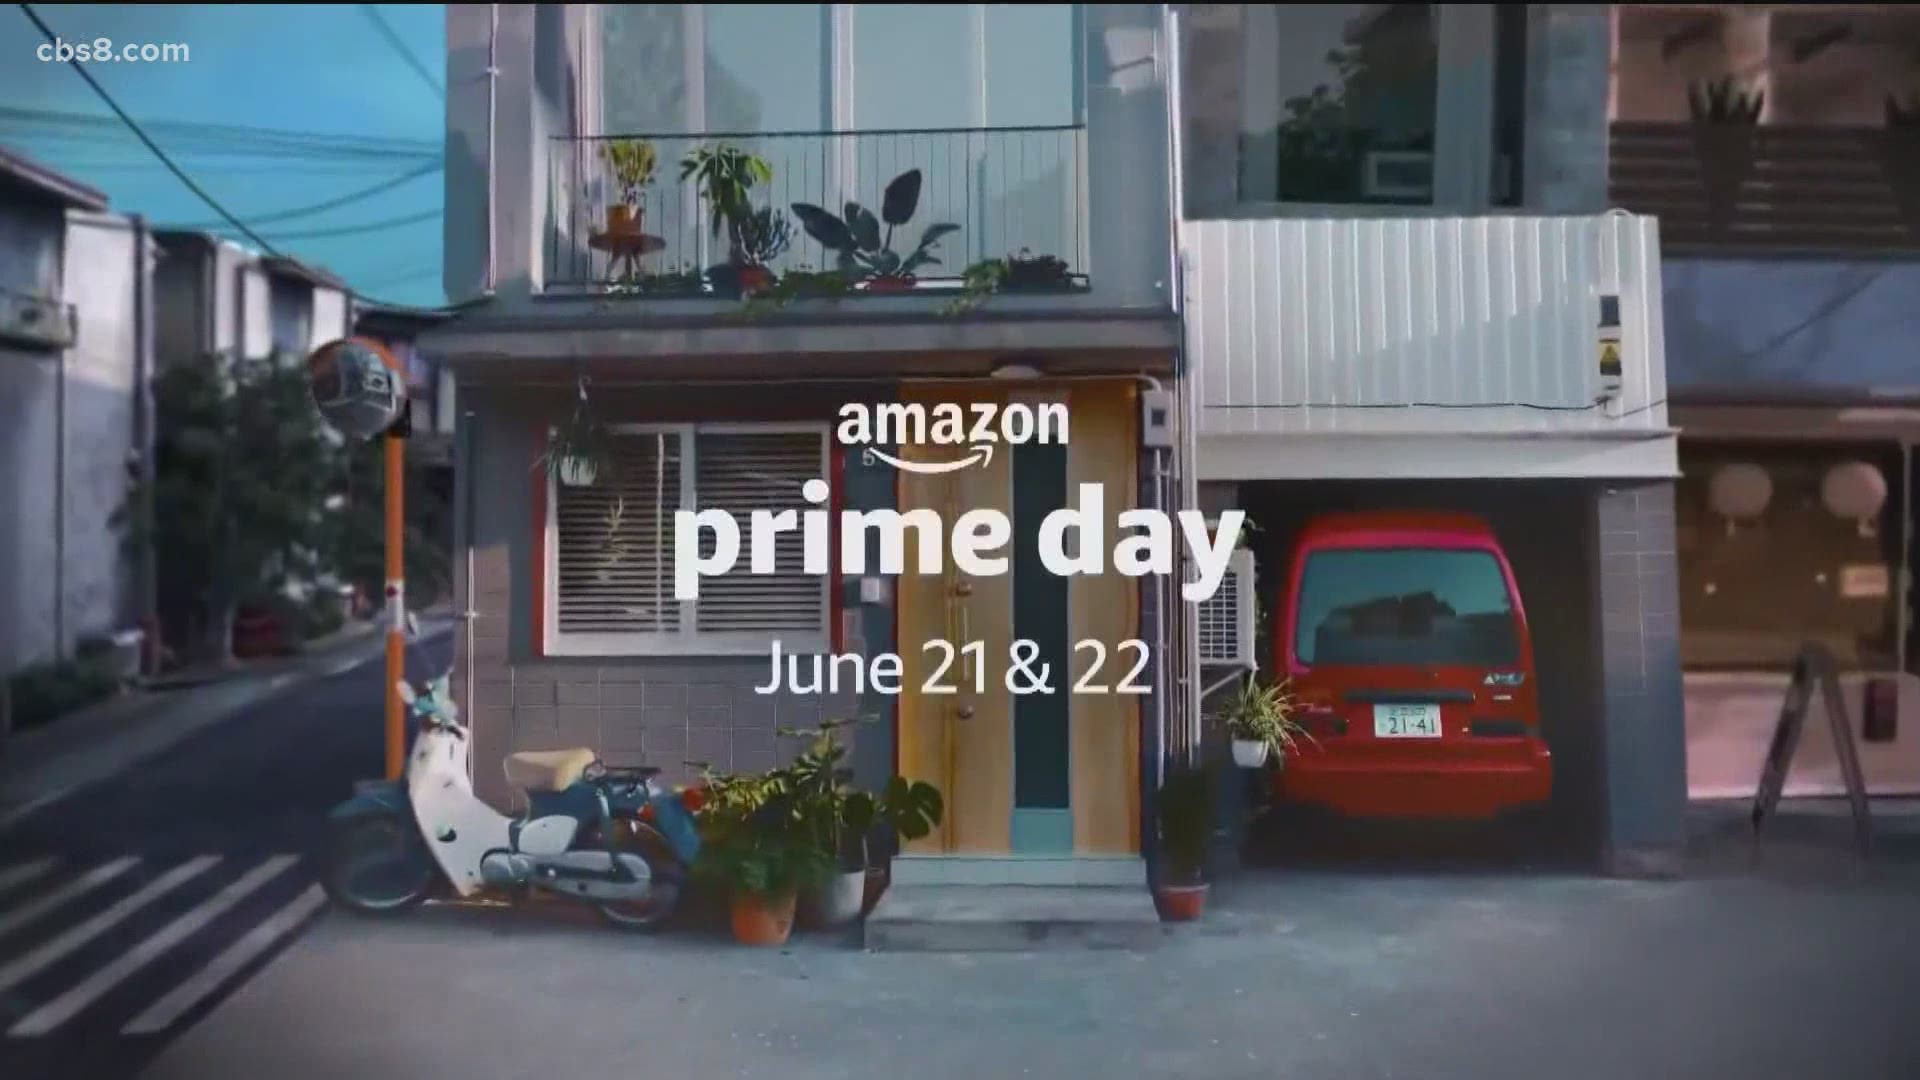 Typically, Amazon holds Prime Day in July. Amazon has said it was holding it earlier due to the Olympics, which starts next month.